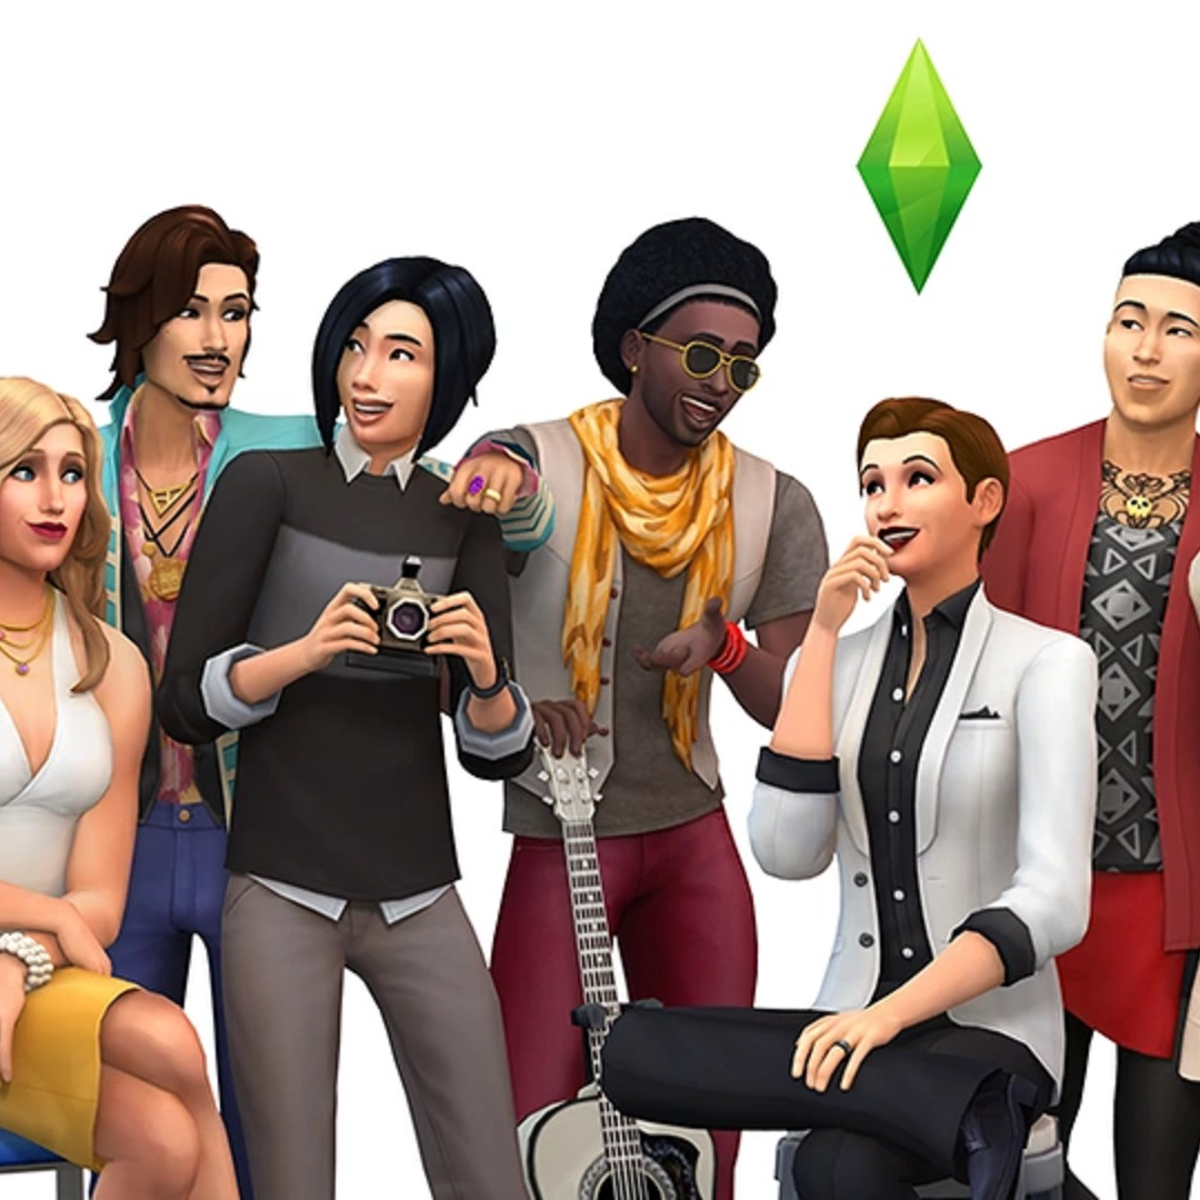 The Sims 4 gender and sexual orientation customisation